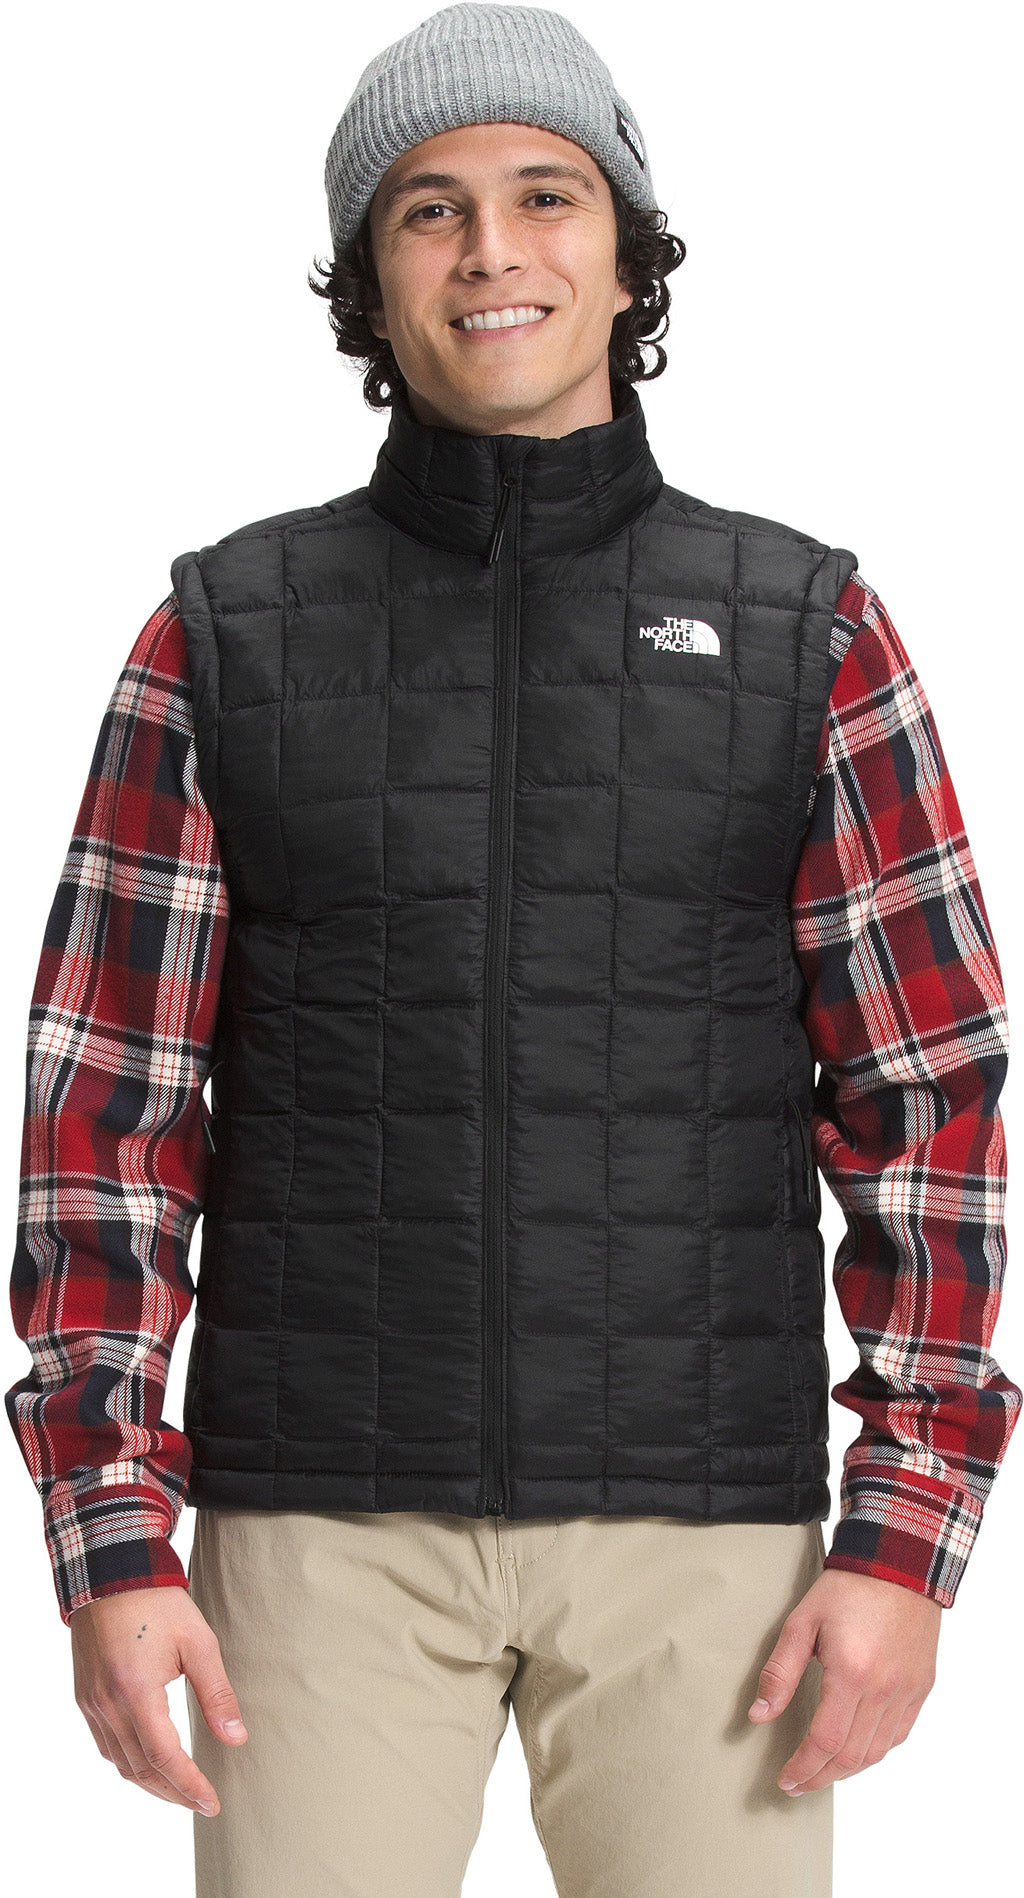 gilet homme the north face